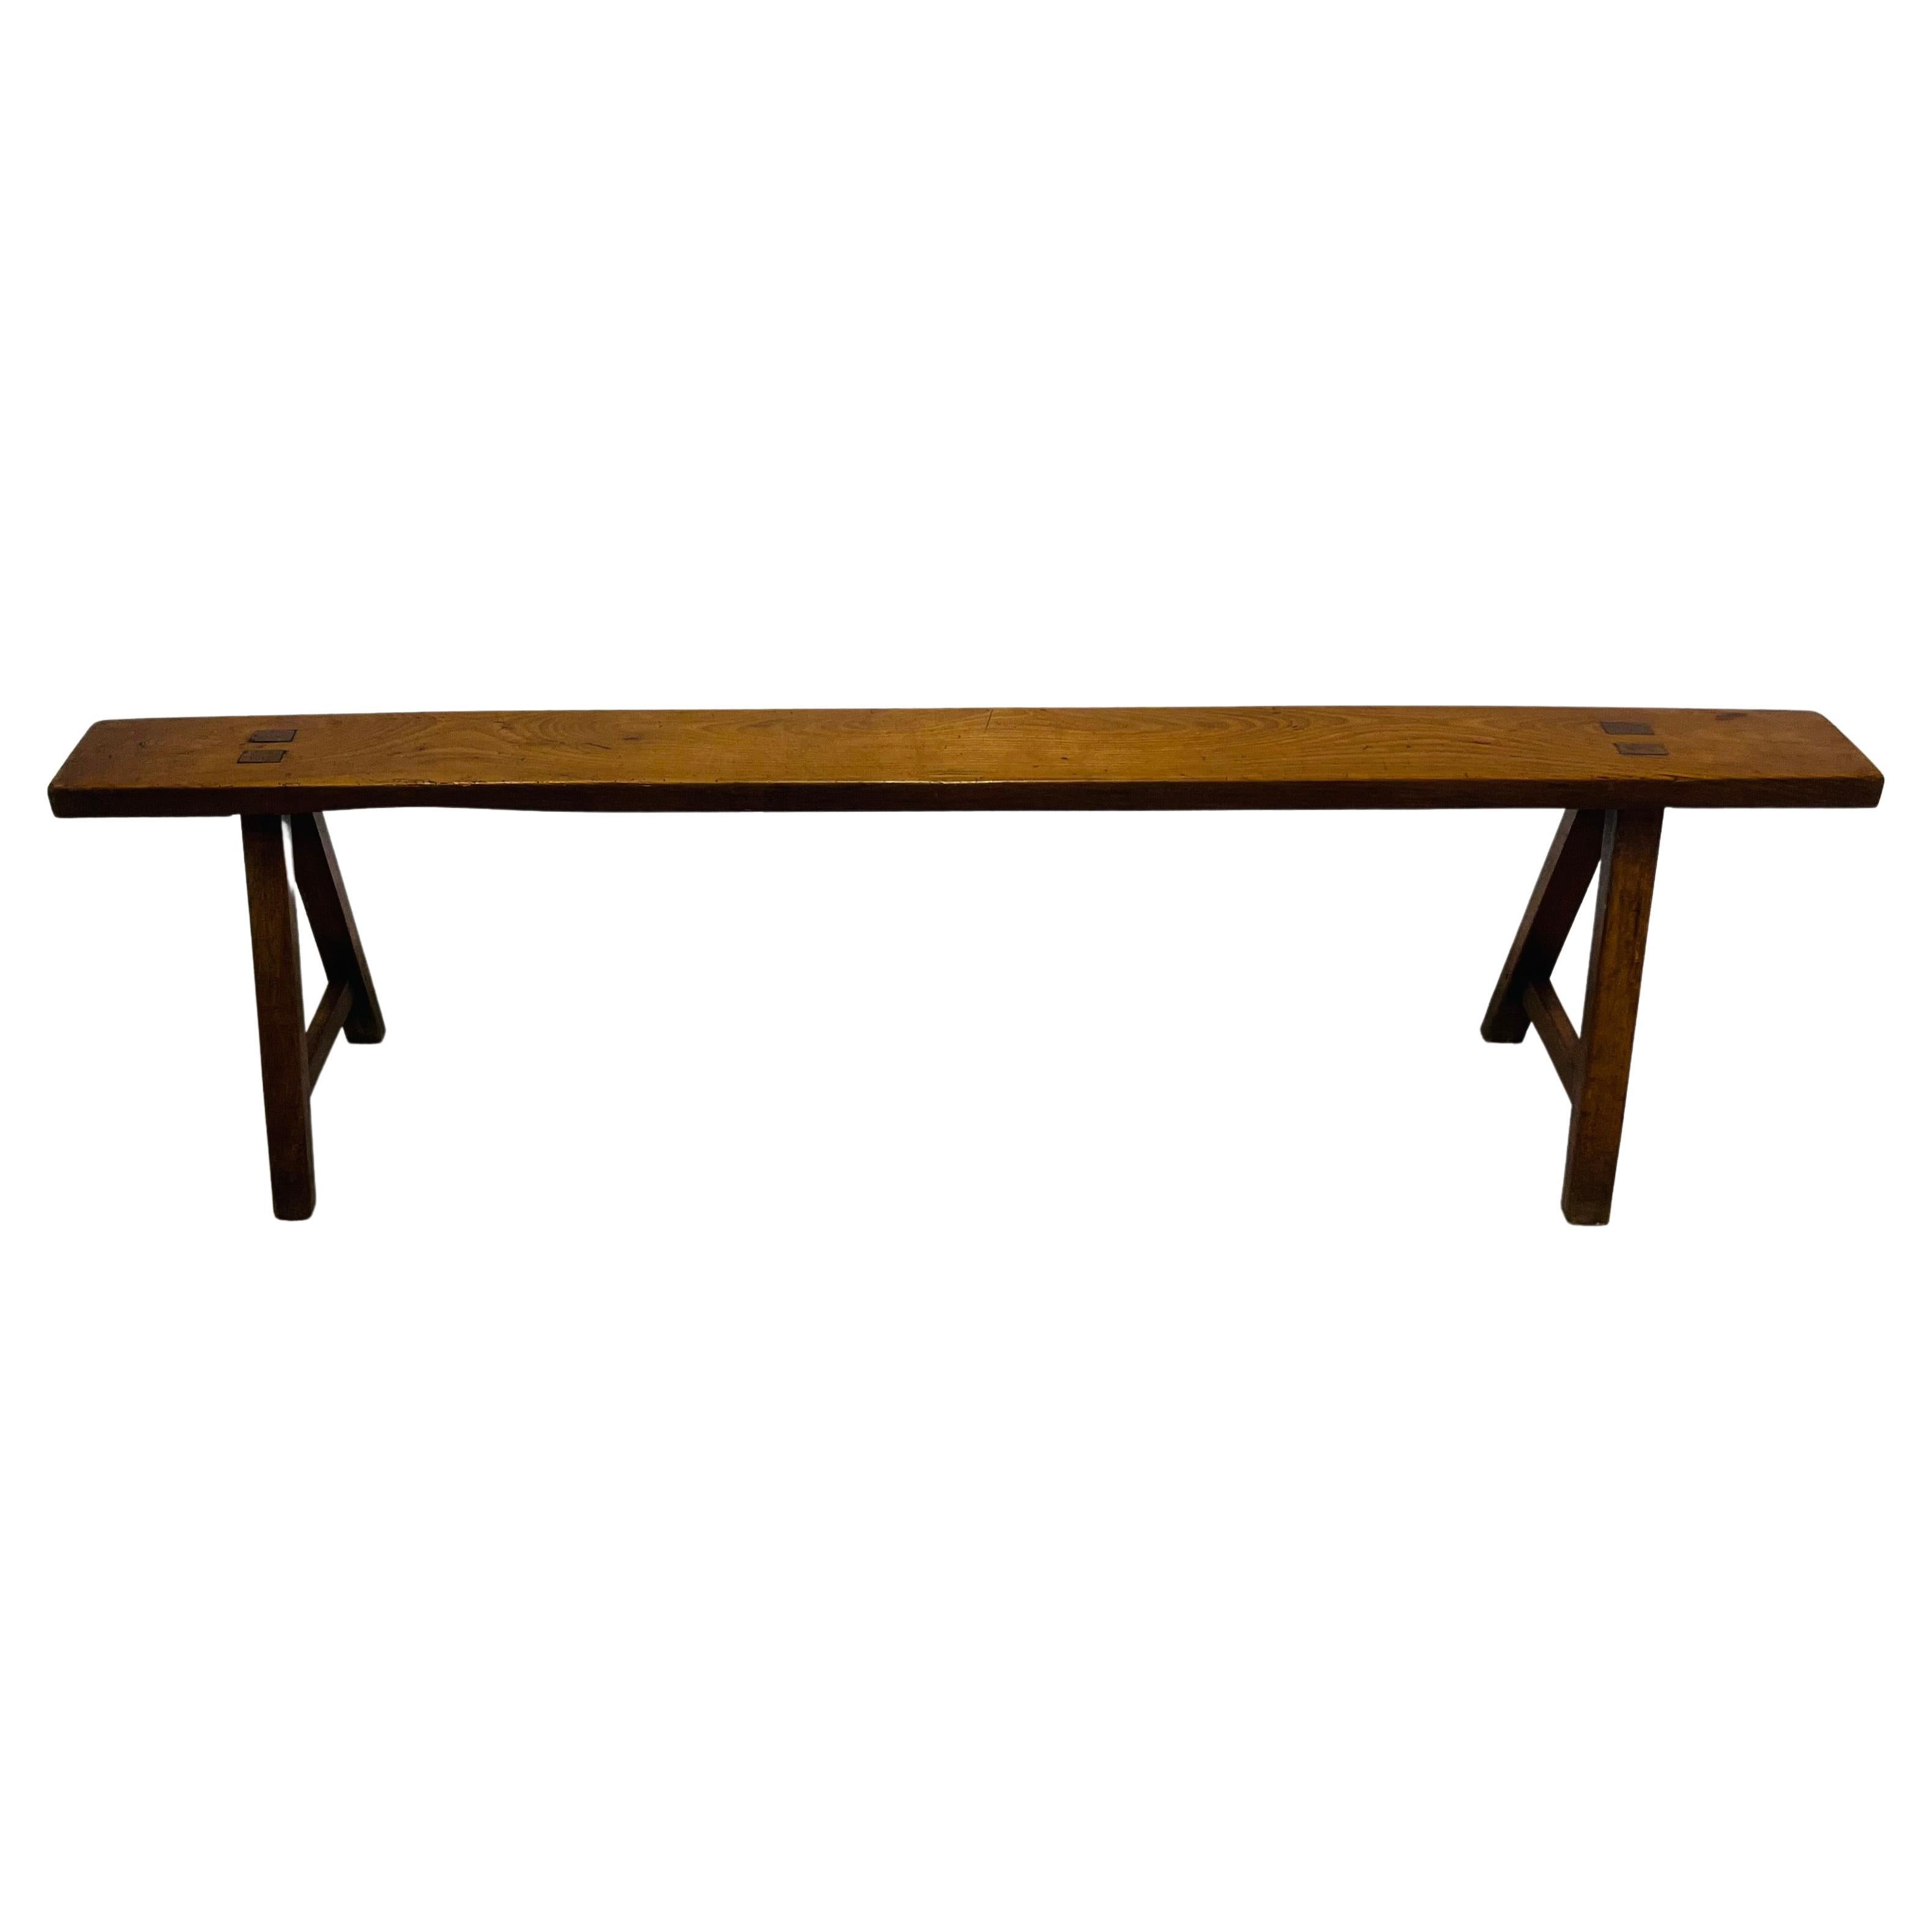 Wooden bench hand made in France in the 1950s, a minimalist line gives a powerful character to this functional decorative element.